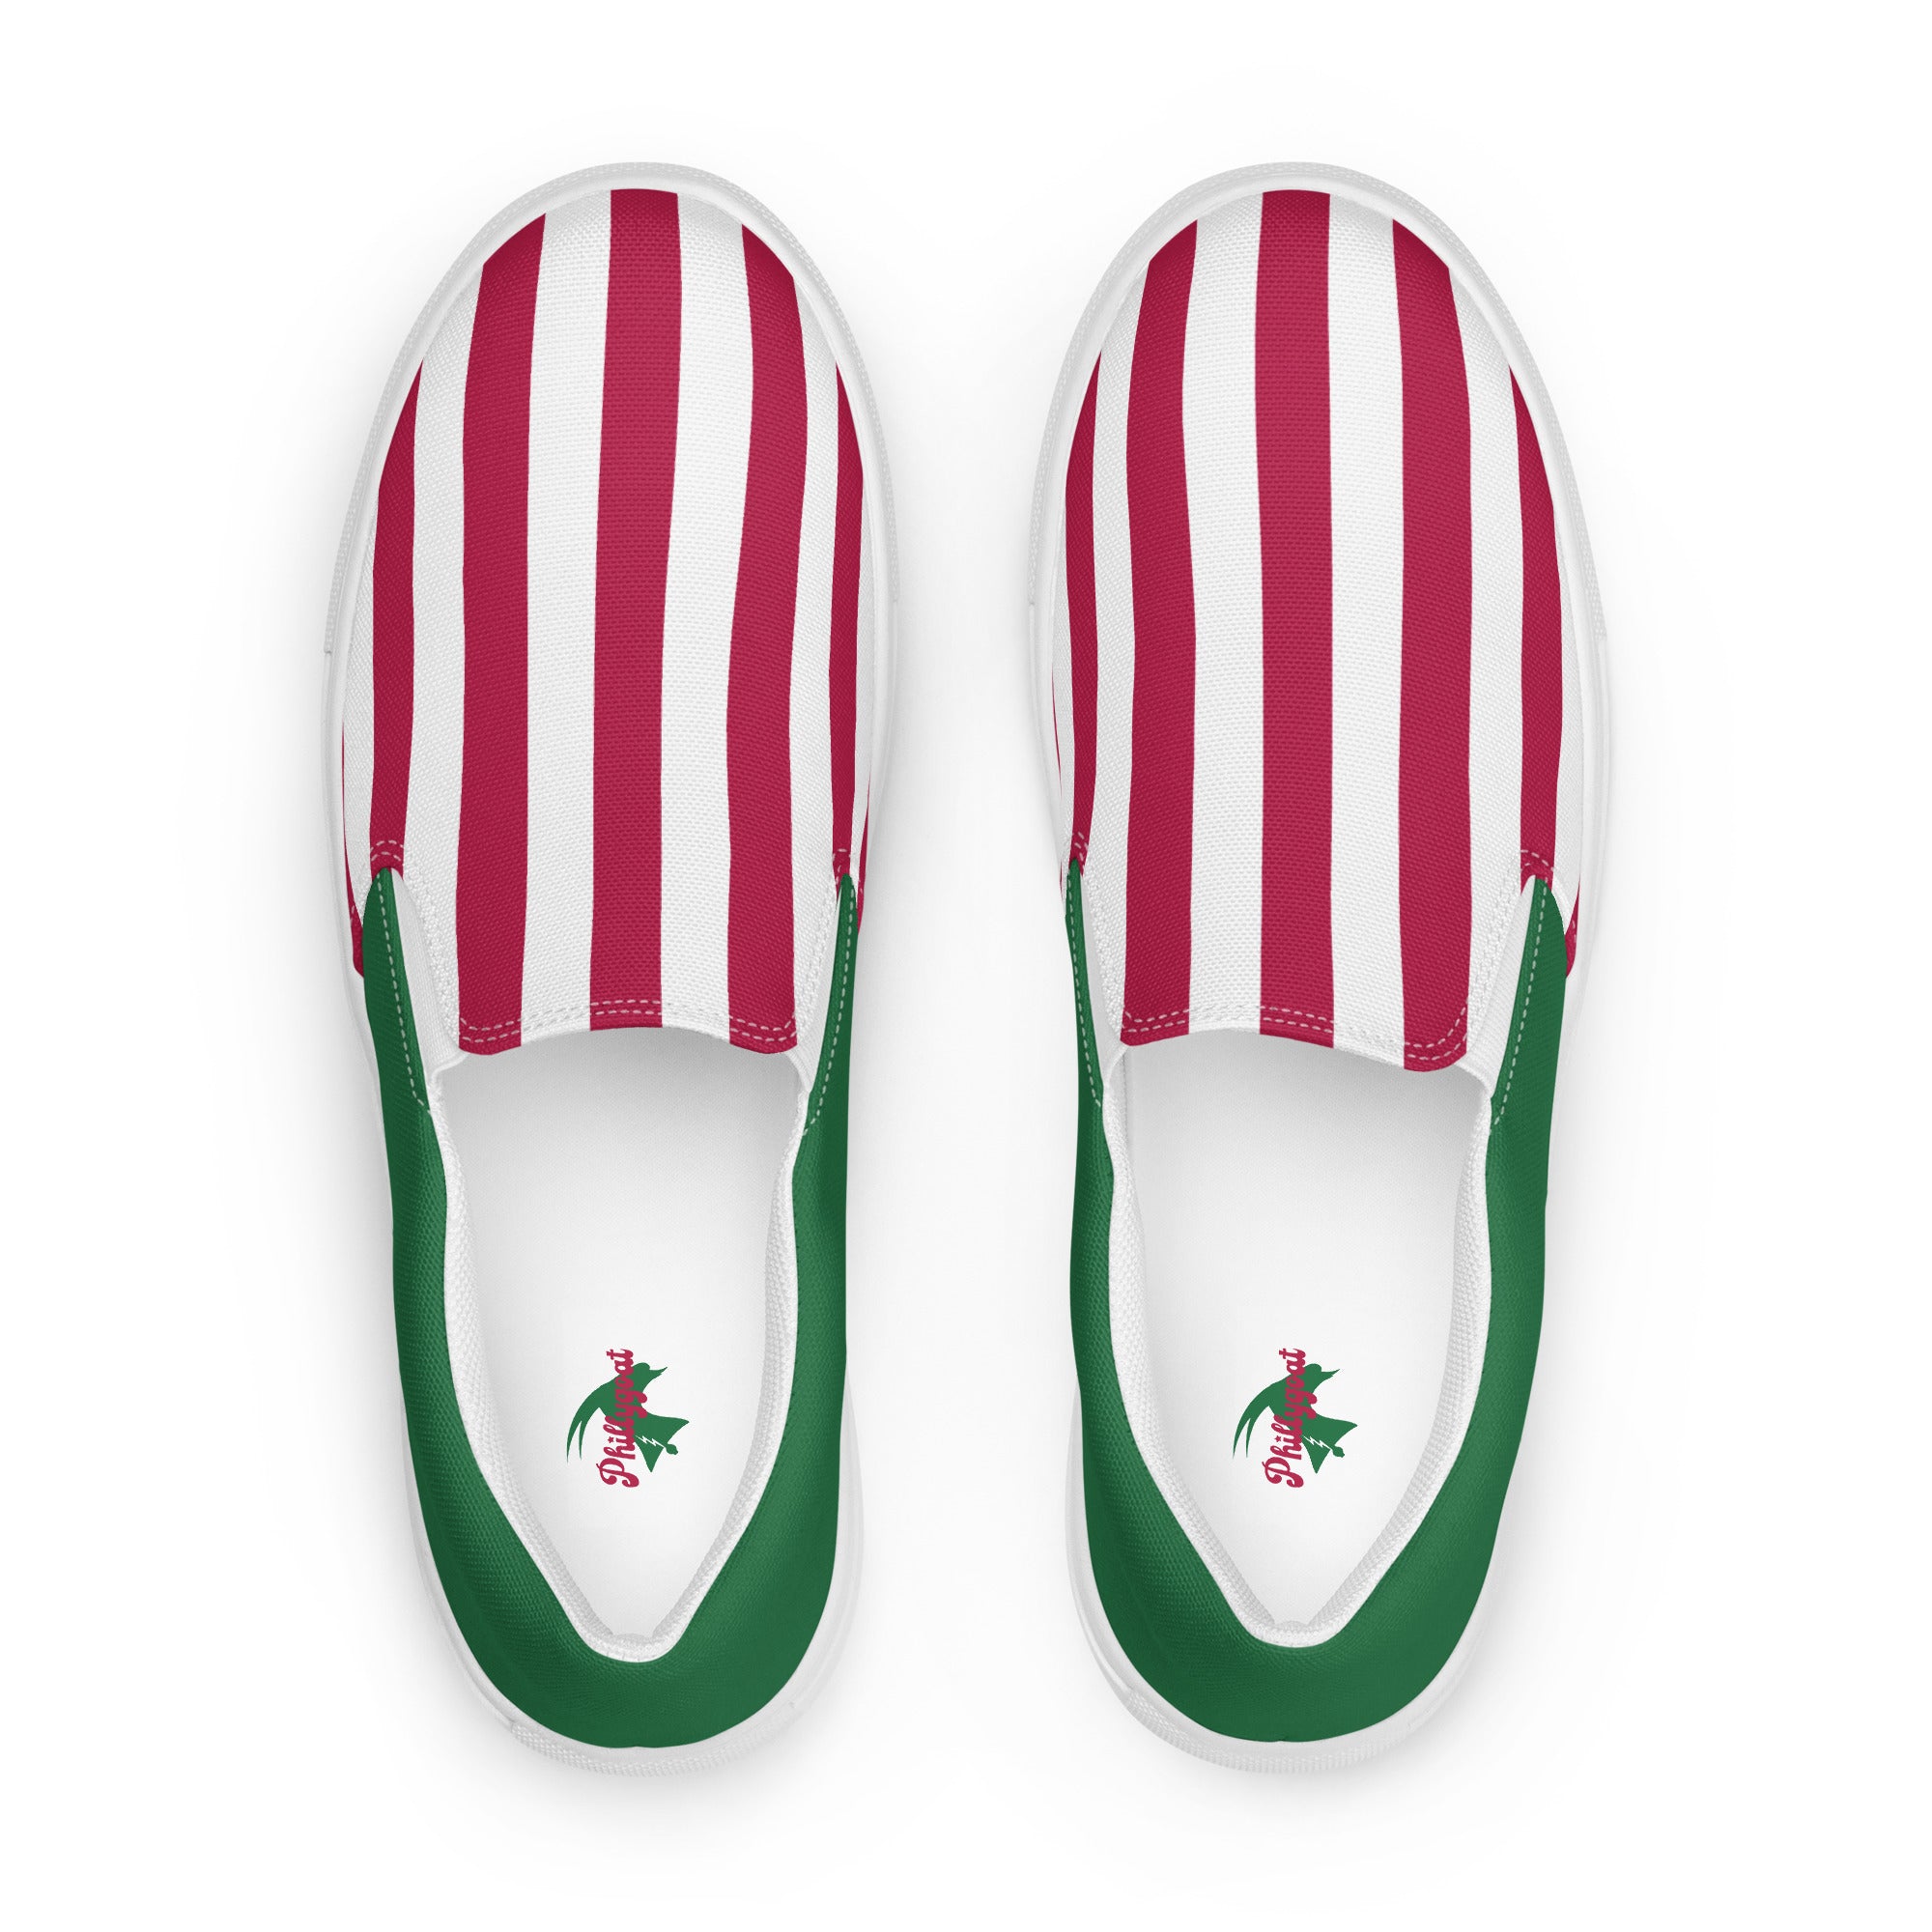 "The Ritas" Women’s Slip-on Canvas Shoes